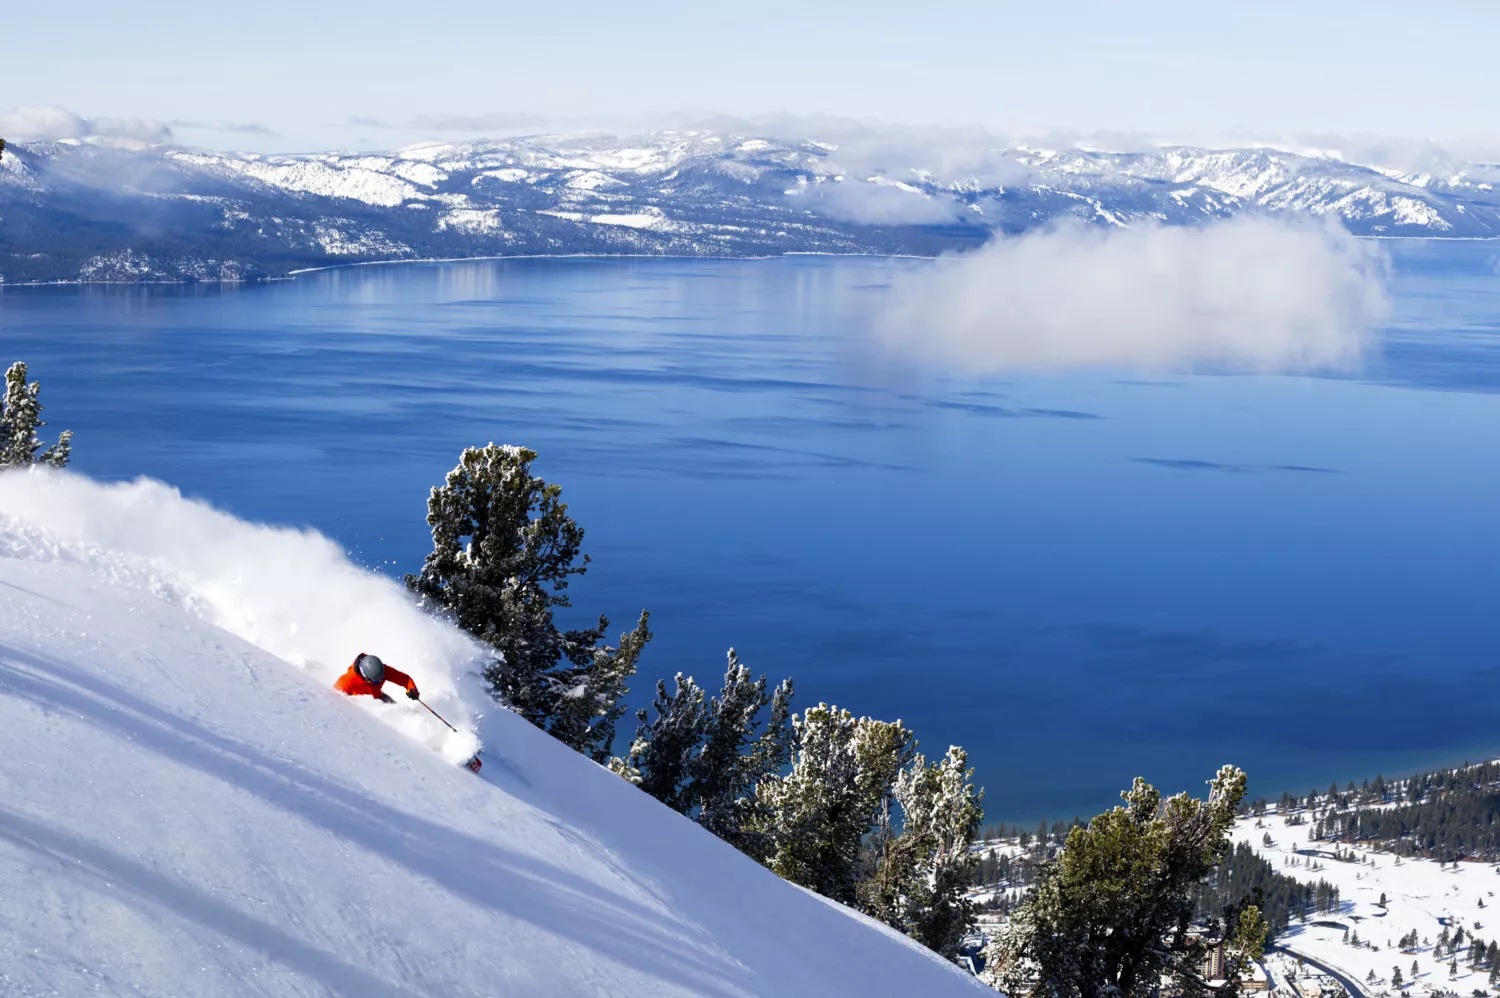 Heavenly Mountain Resort in USA, North America | Snowboarding,Skiing - Rated 4.6